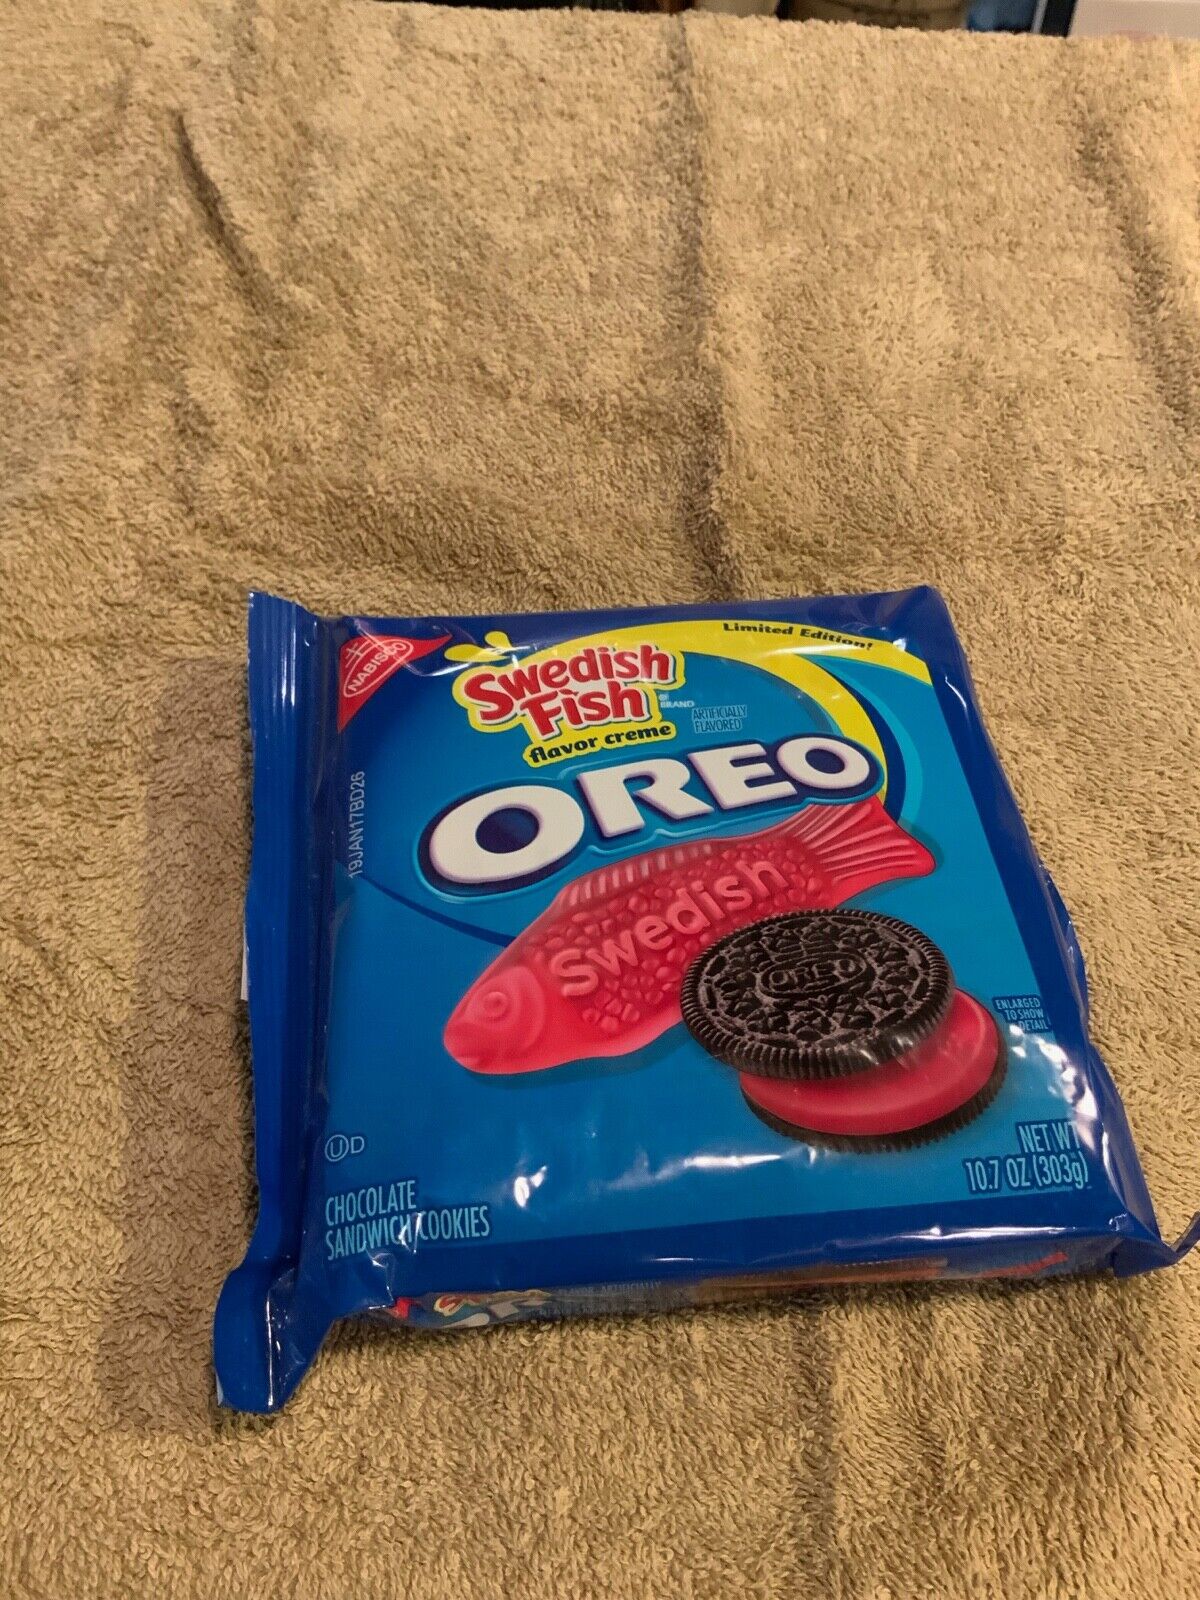 Swedish fish oreo cookies. Original never opened or tampered with. Perfect mint